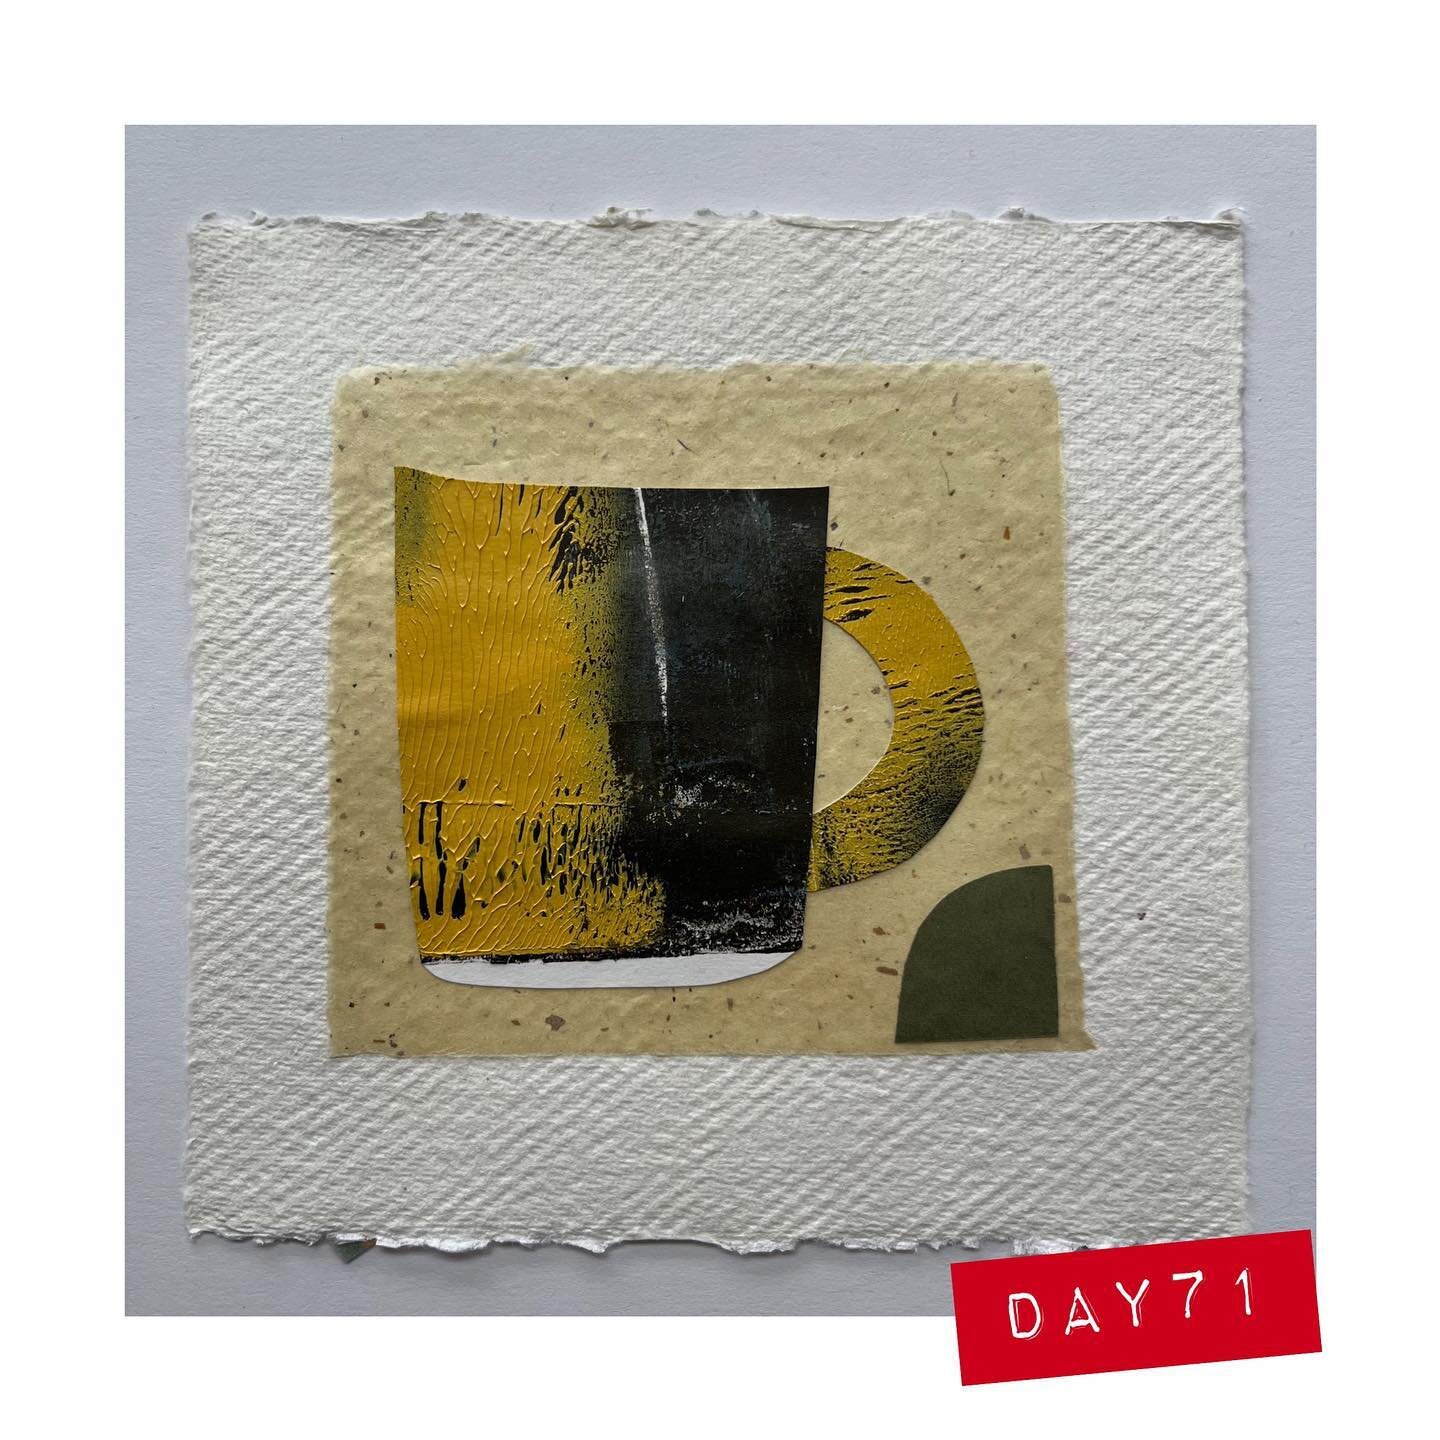 Day 71 - I always put one coffee cup in the collage series each year!! And today seemed a coffee inspired day. 

Enjoy your first cup of the day, or your first Coca-Cola if your name is Kathy!!! @kathycookquilts &hearts;️

☕️☕️☕️

🤍 #100dayproject20